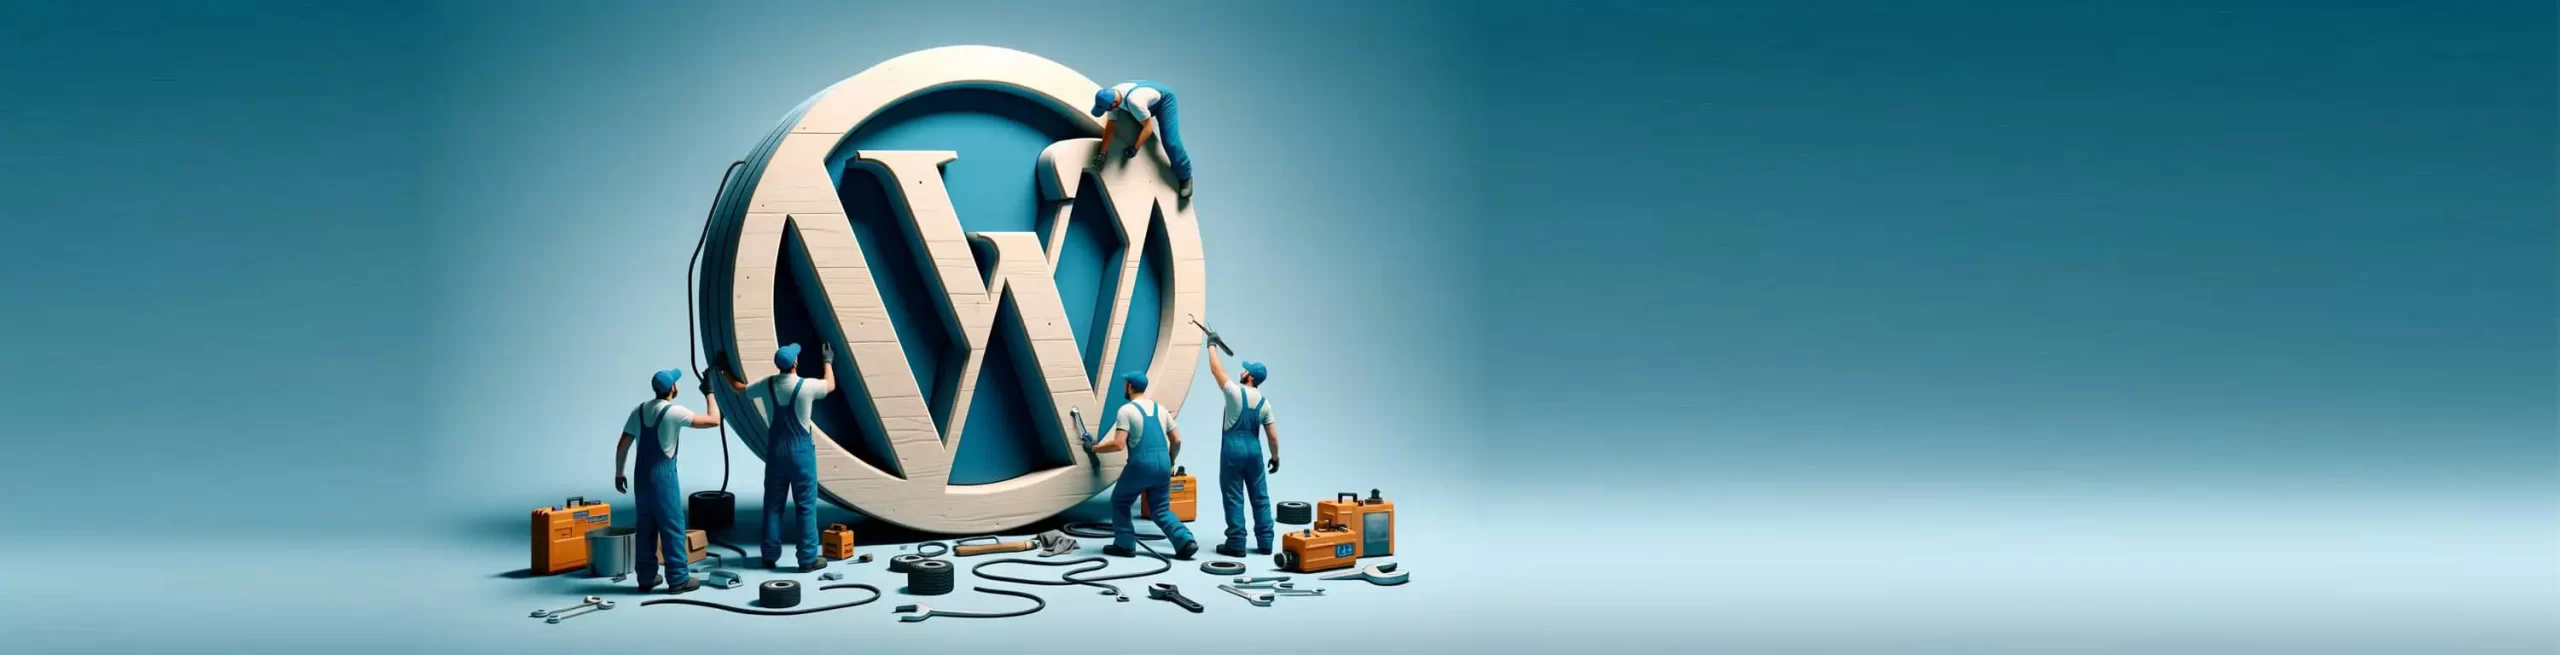 Expert WordPress Support & Security Services in Asheville